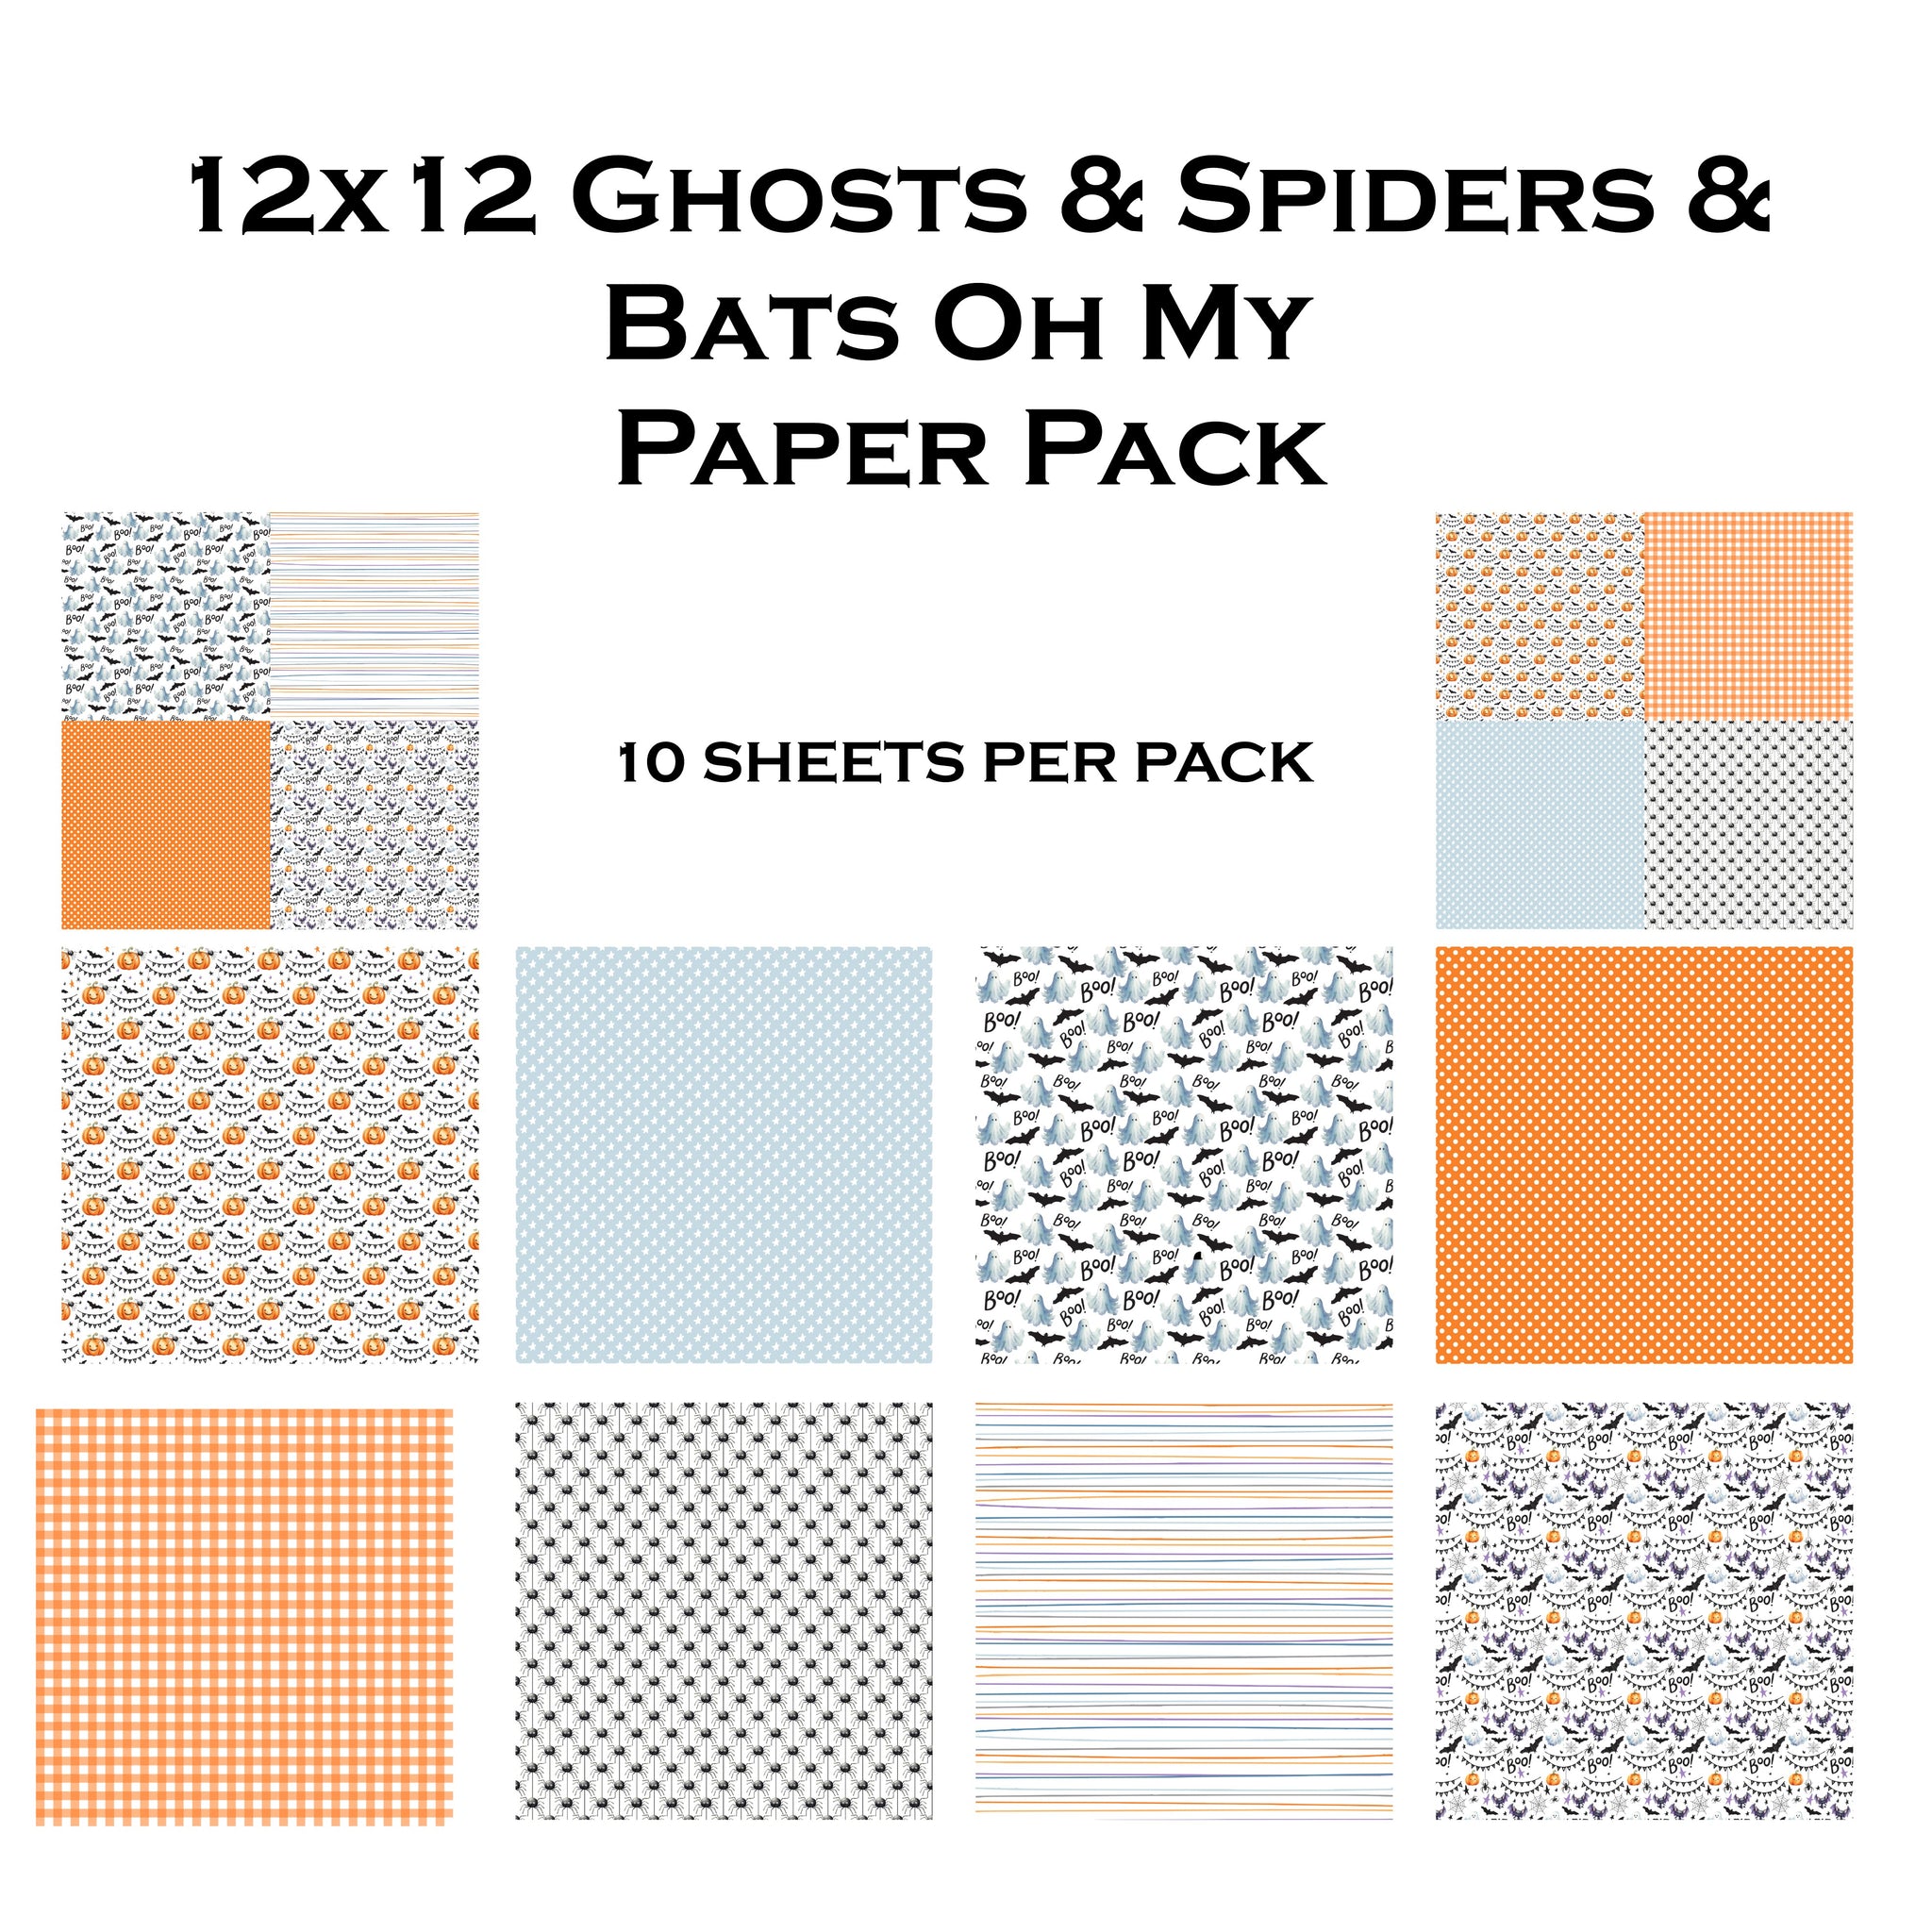 Ghosts & Spiders & Bats Oh My 12x12 Paper Pack